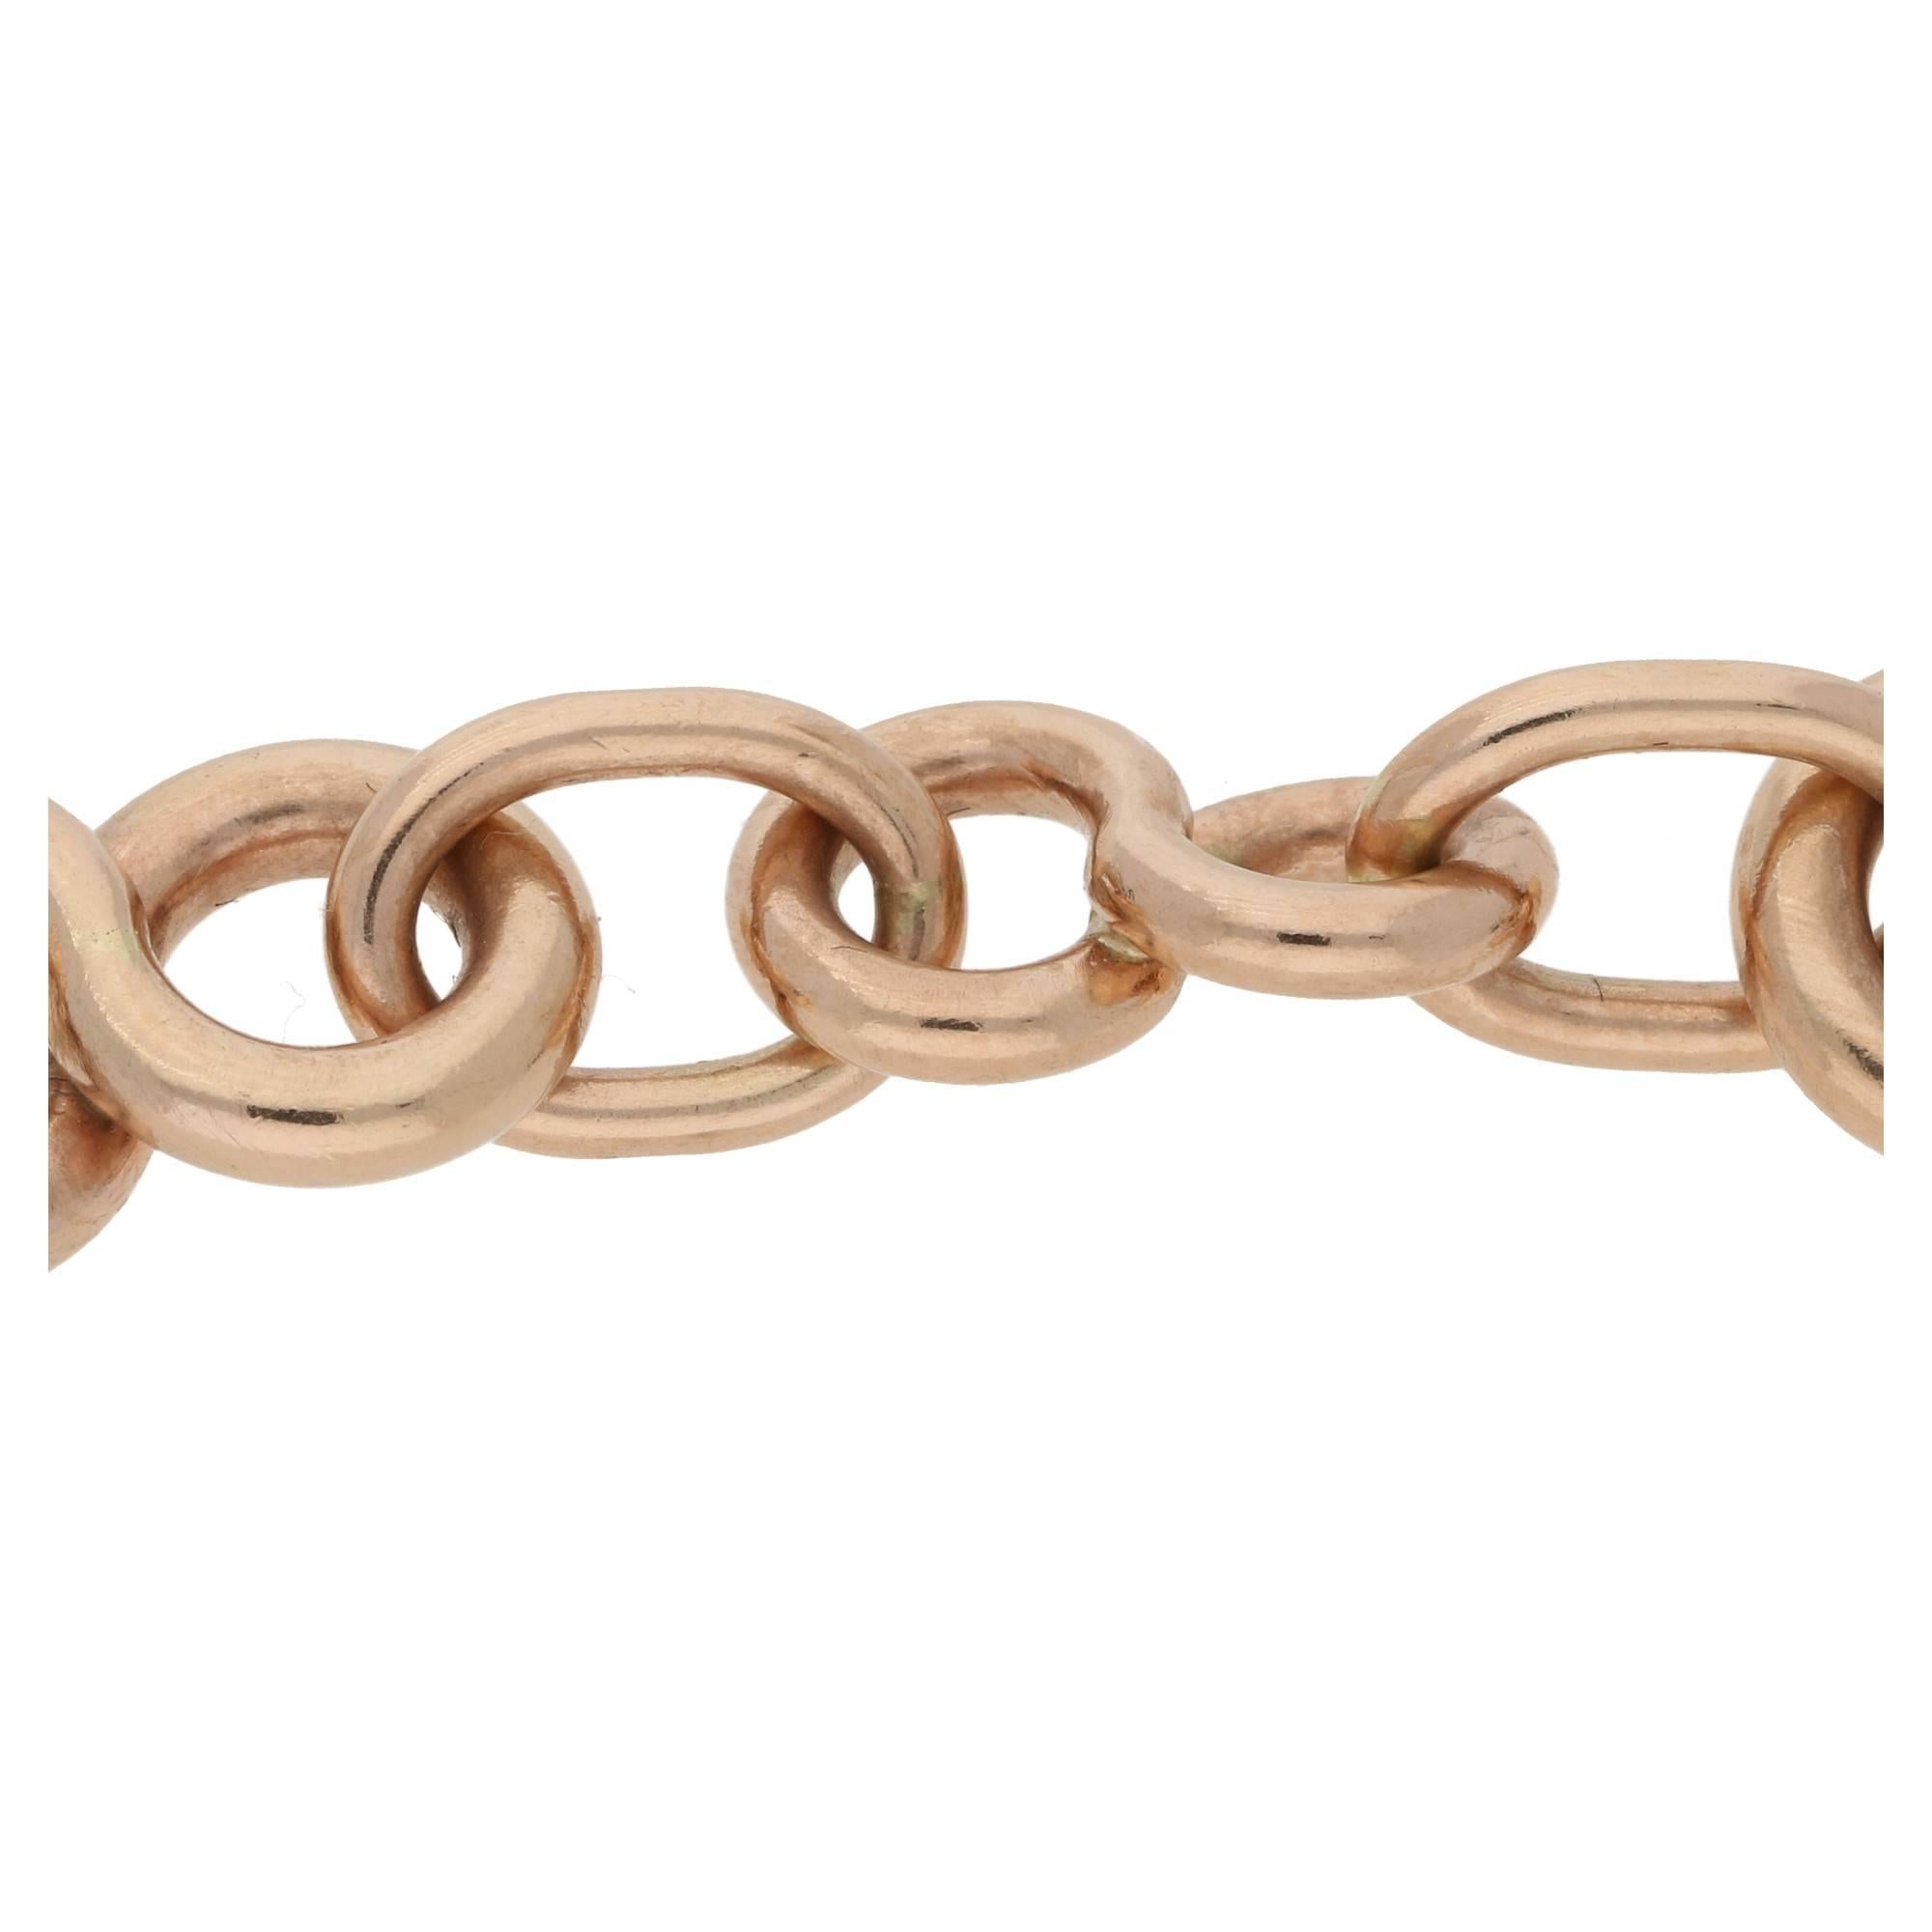 A fun warm rose gold tone 9k gold bracelet. The bracelet is formed of figure of eight motifs each linked with an oval section. This measures 7.5 inches length, the clasp is hallmarked 9k indicating the gold quality.